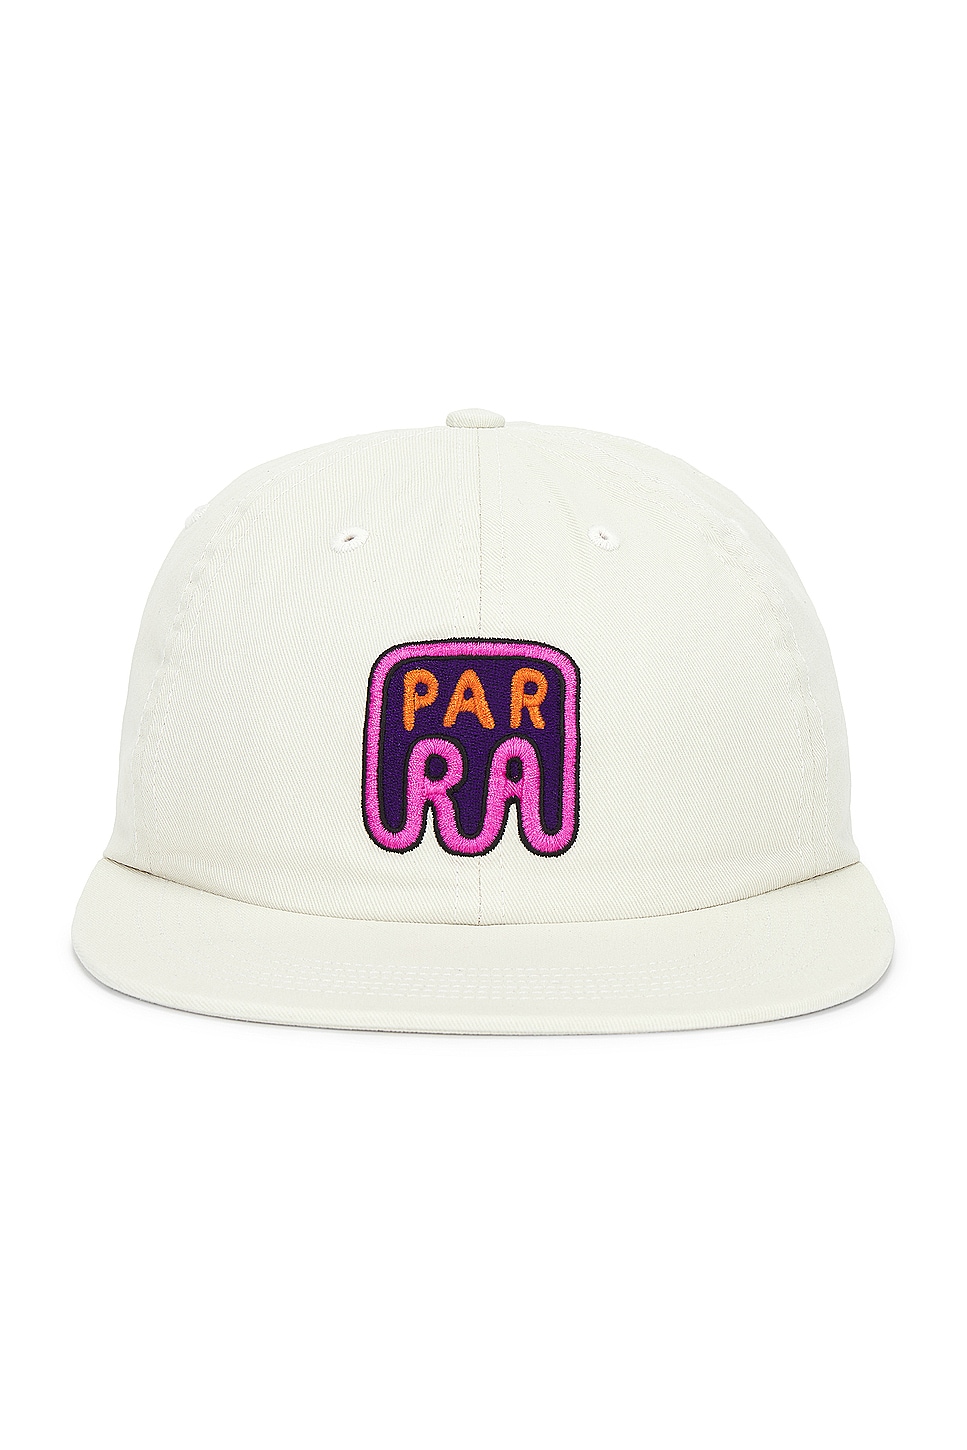 Fast Food Logo 6 Panel Hat in White